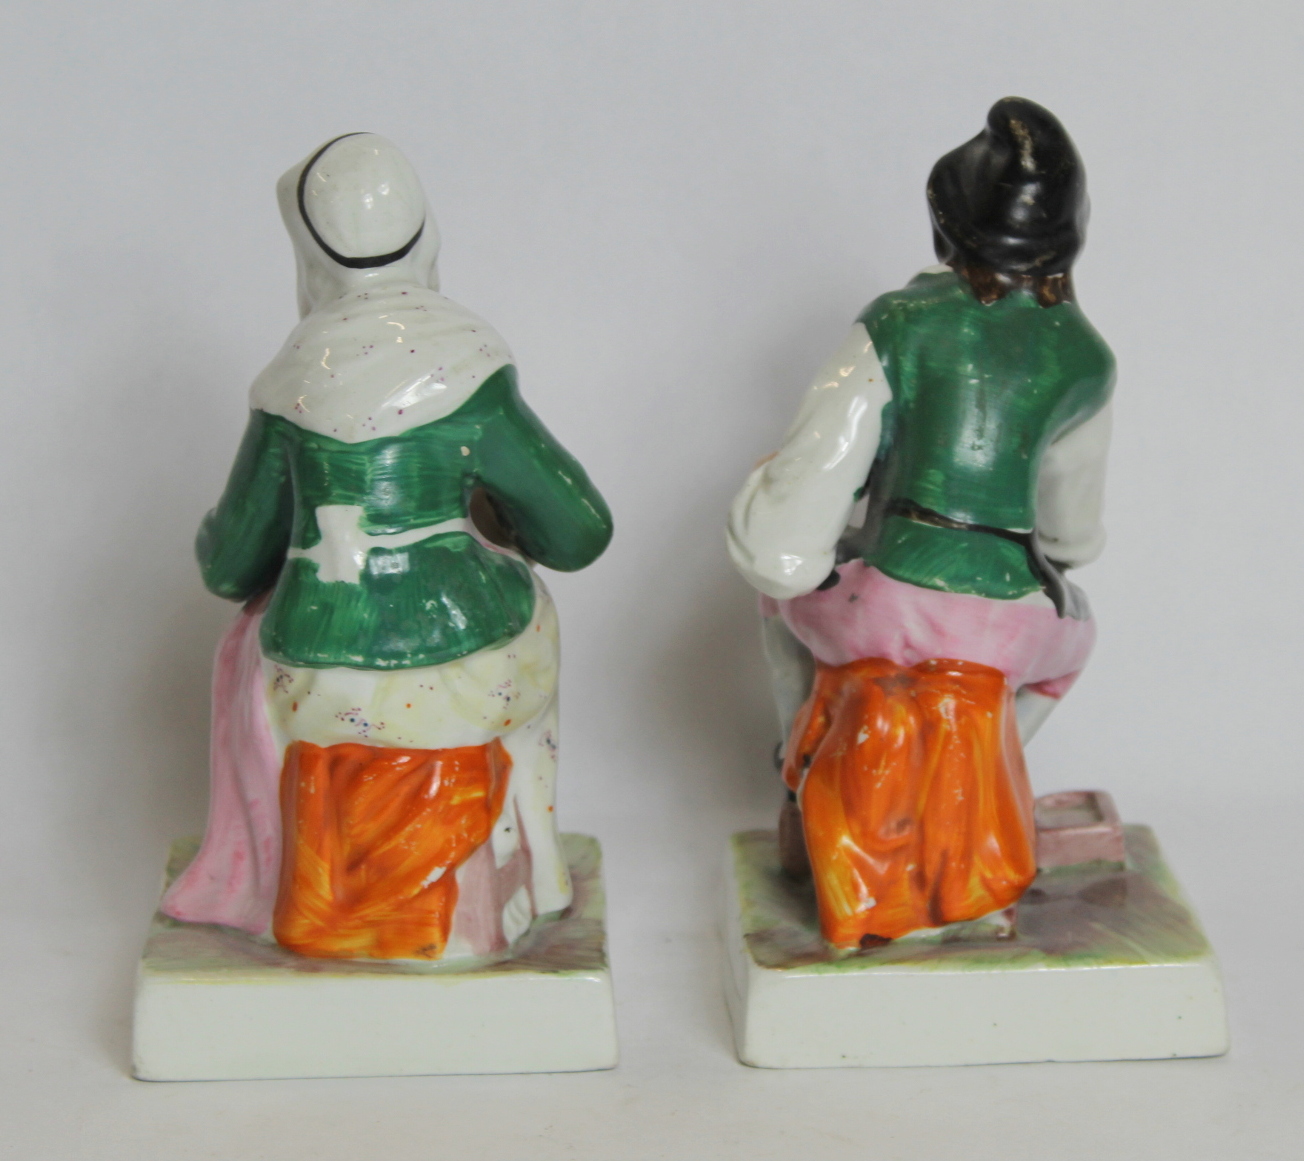 Pair of 19th century porcelain figures of a cobbler and his wife seated on a square plinth base - Image 2 of 3